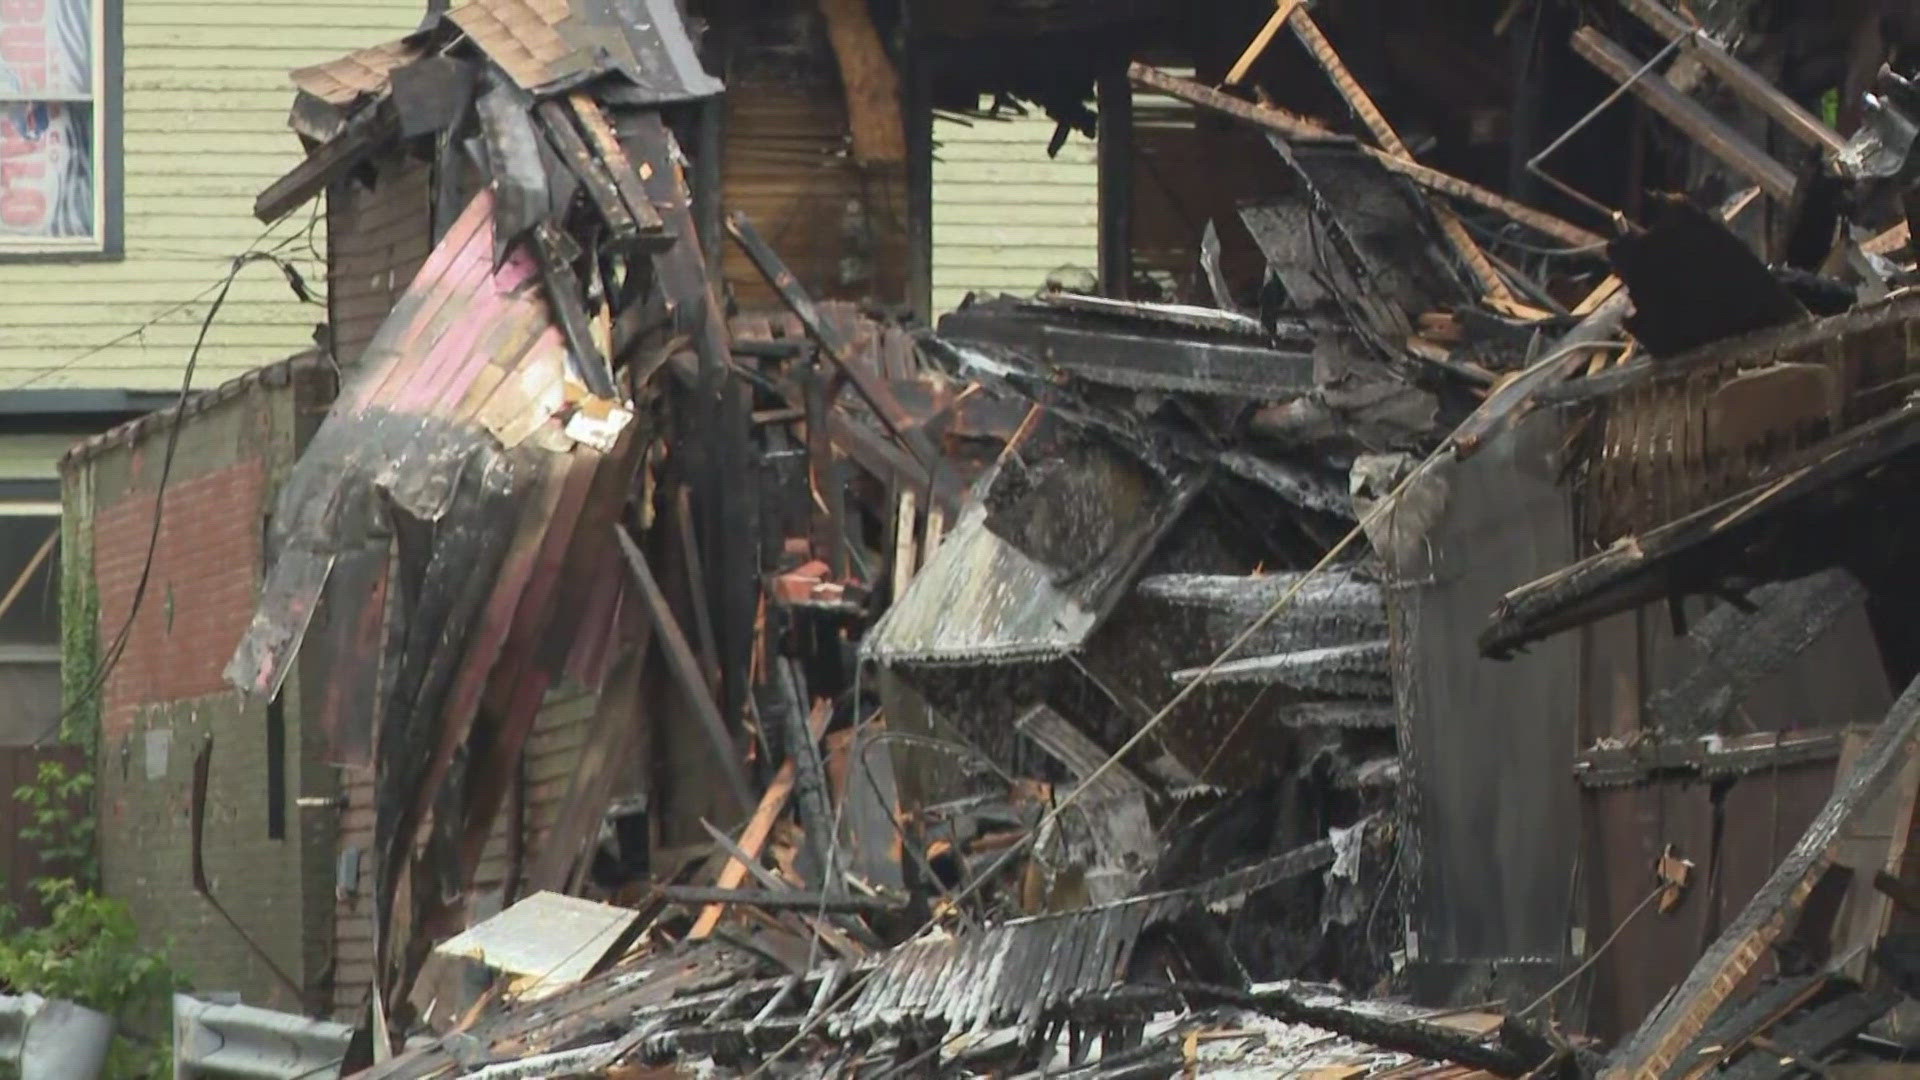 Midday Update: The Old Pink aftermath following devastating fire